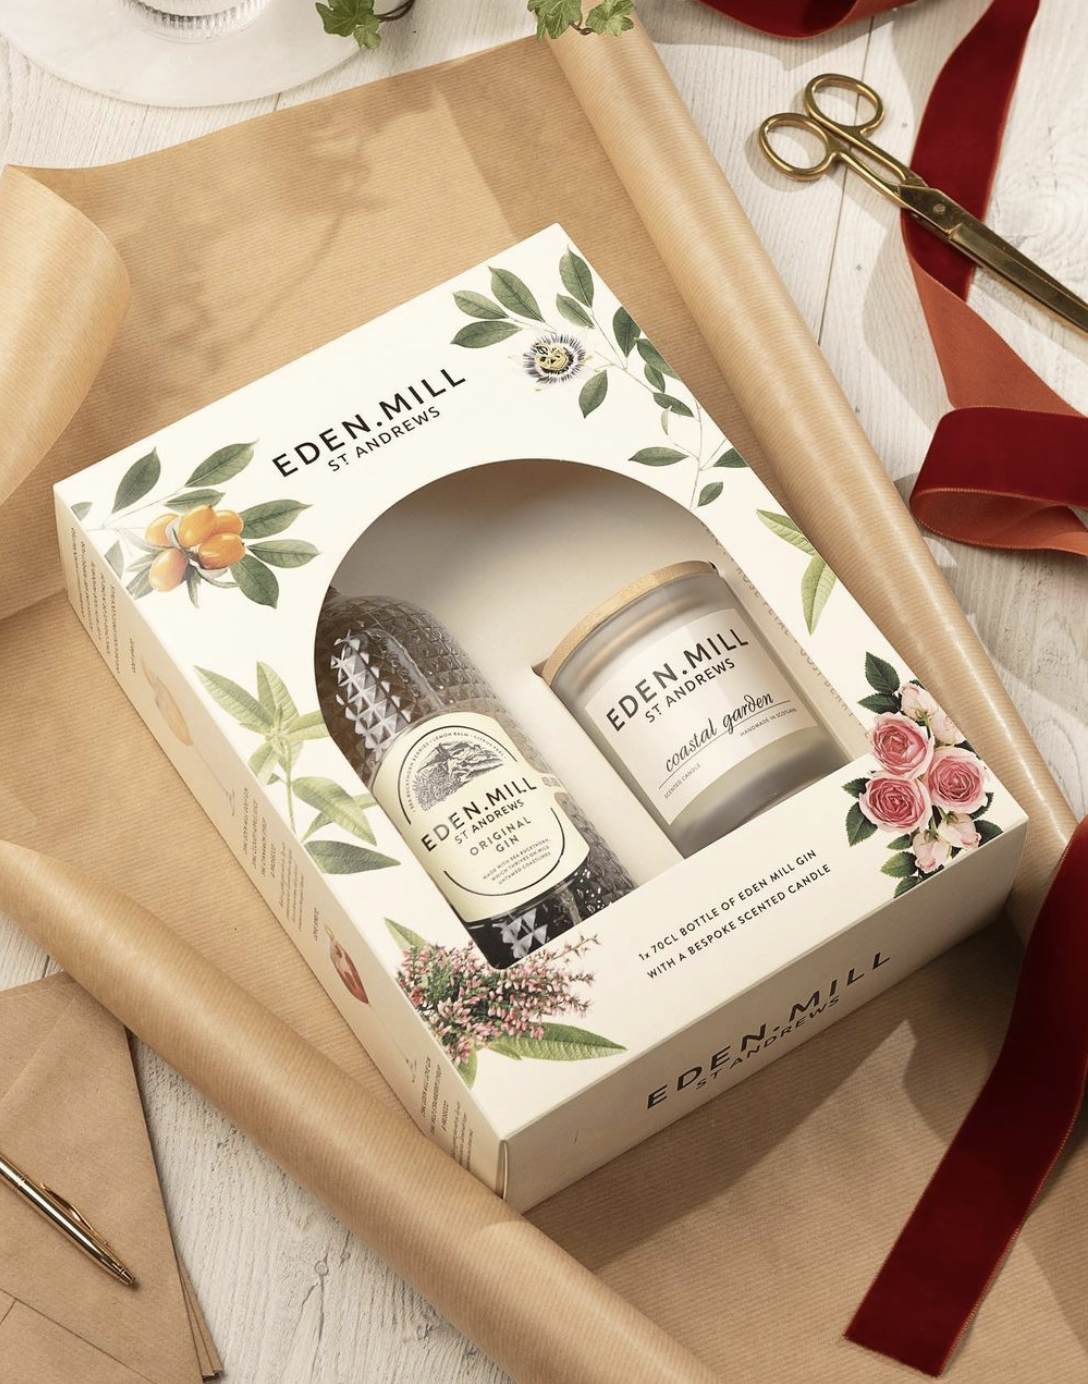 Image of a Christmas gift box of Eden Mill gin with ribbon and brown paper